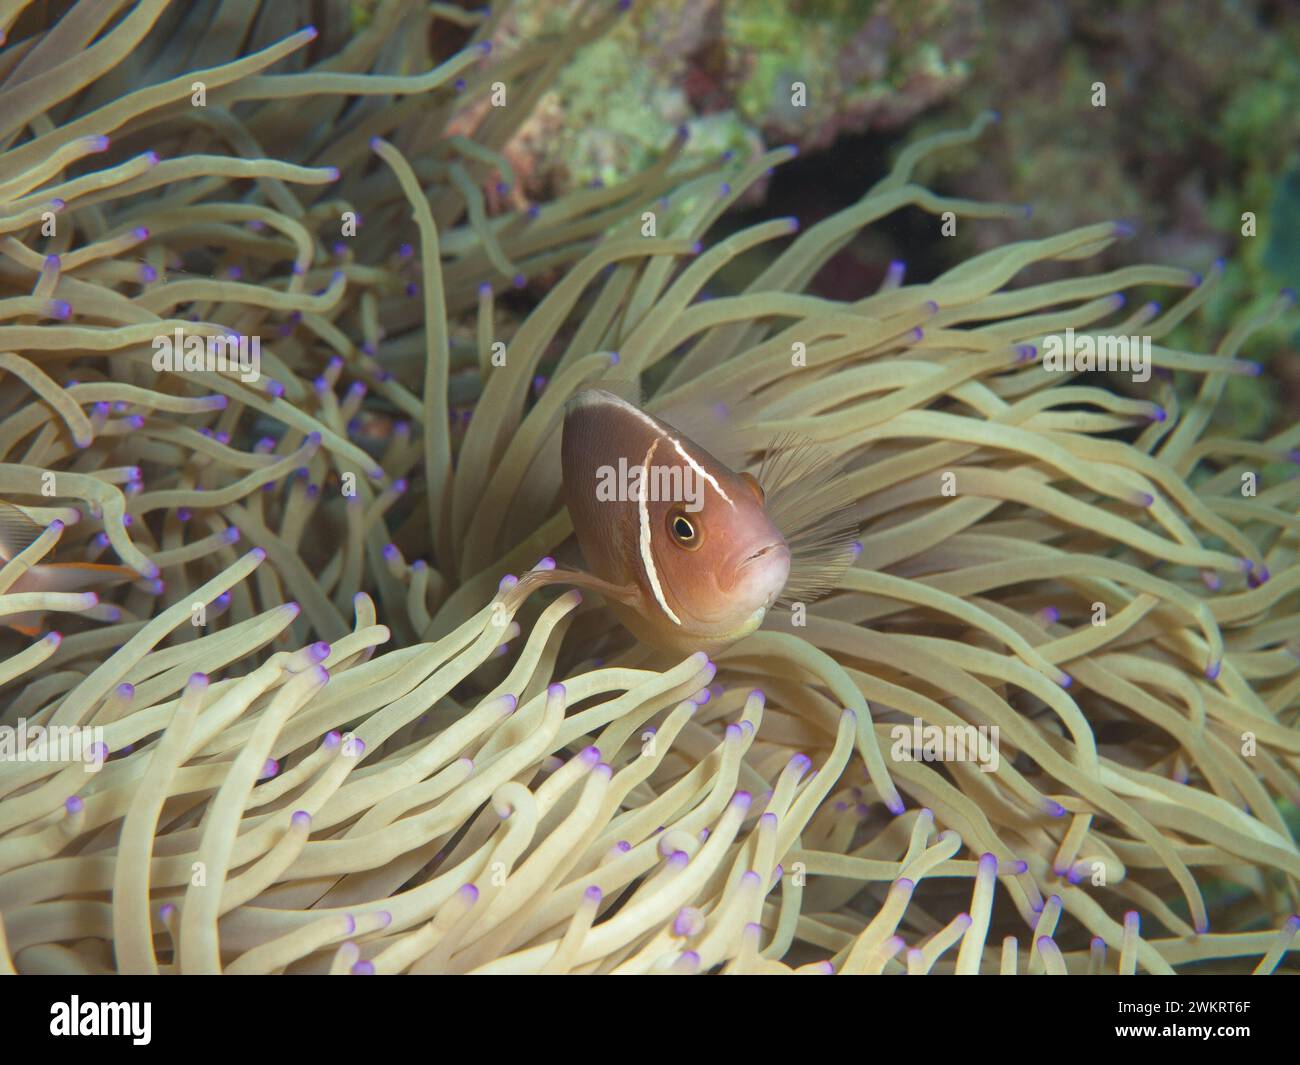 Anemonefish are always on the move: Clownfish looks curiously out of its anemone. Underwater photography: A coral reef at Moalboal, Cebu, Philippines. Stock Photo